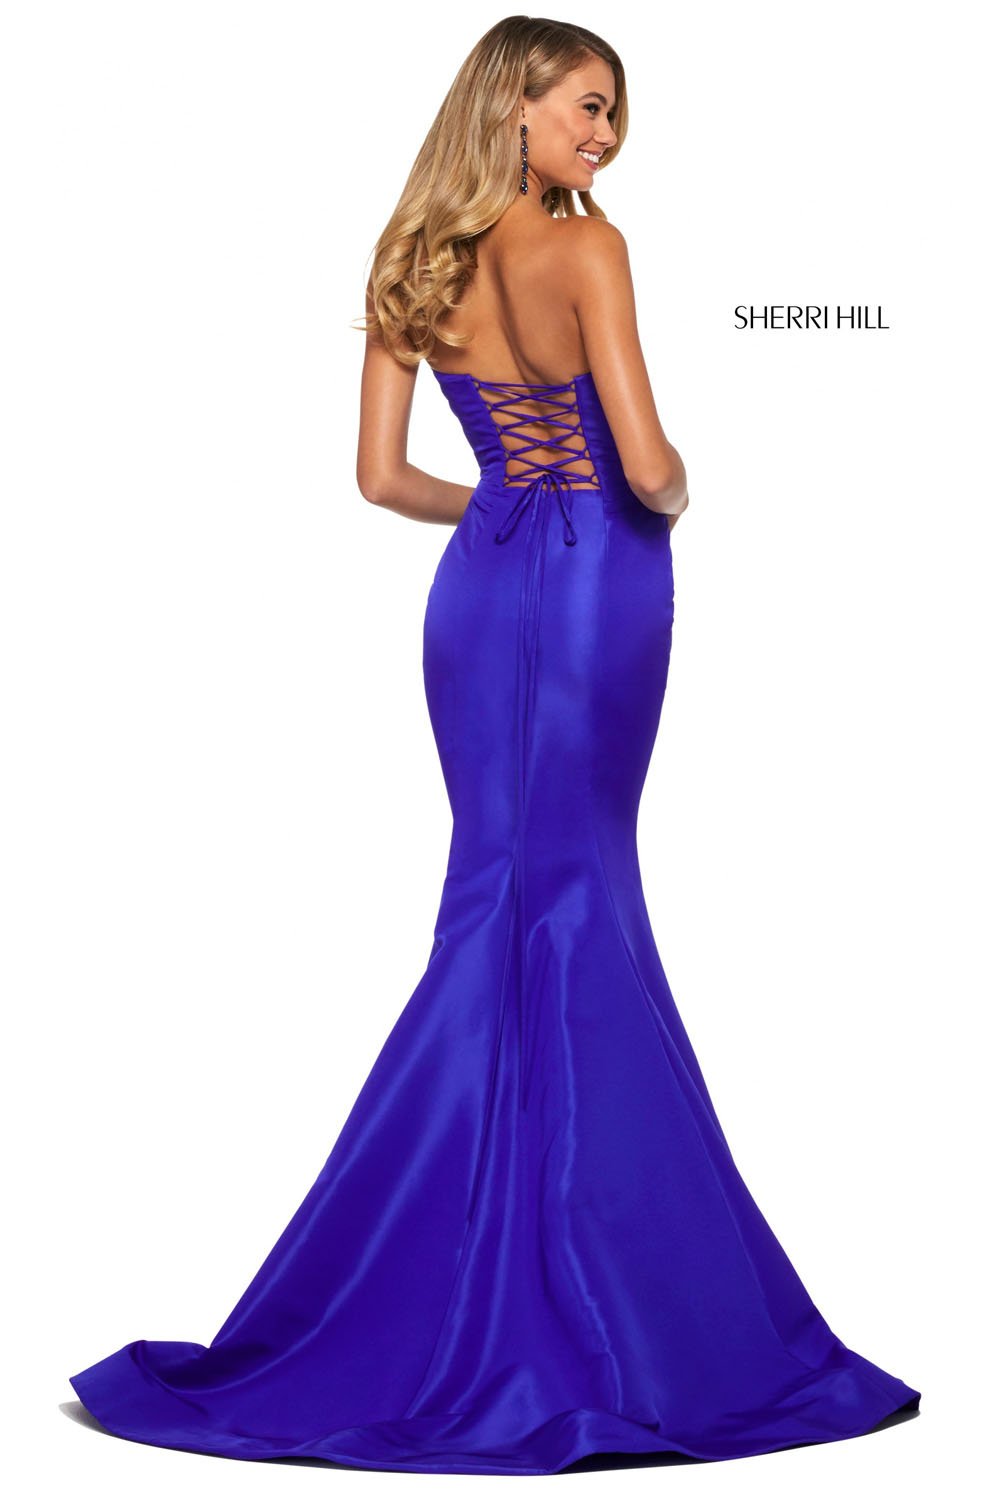 Sherri Hill 53341 dress images in these colors: Yellow, Light Blue, Emerald, Black, Lilac, Red, Candy Pink, Royal, Coral, Navy, Fuchsia.